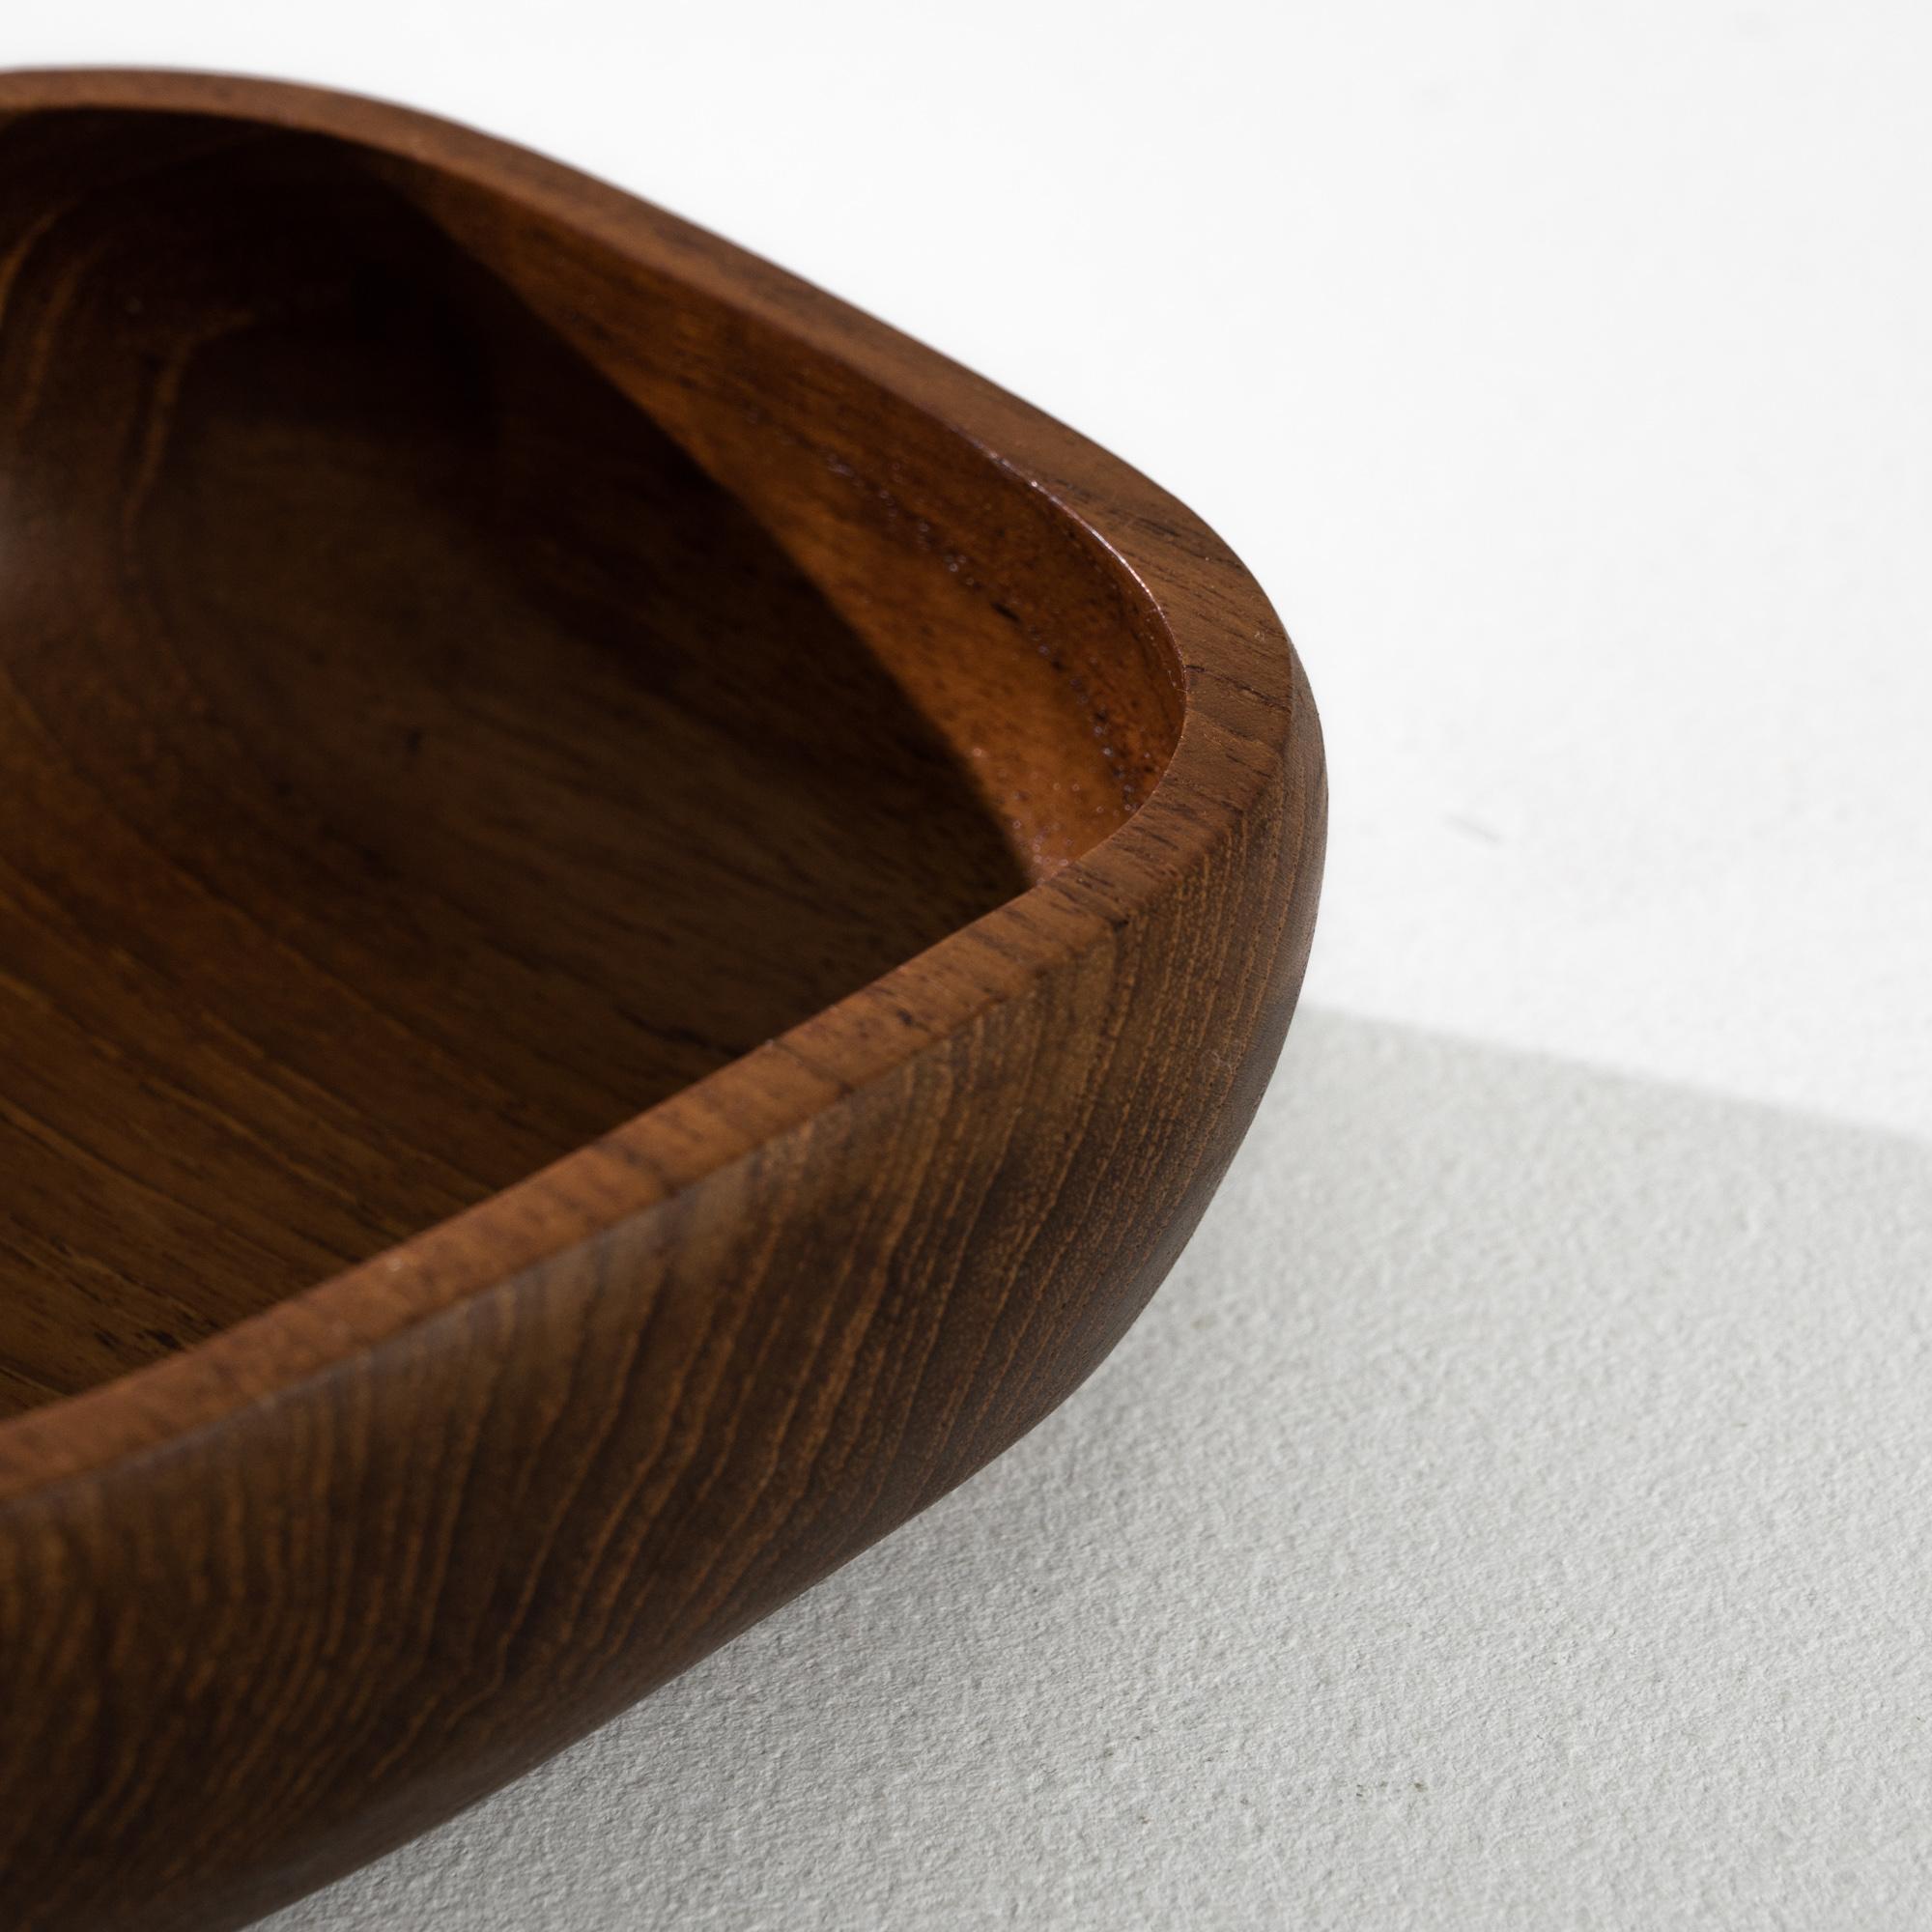 1970s Danish Teak Bowl In Good Condition For Sale In High Point, NC